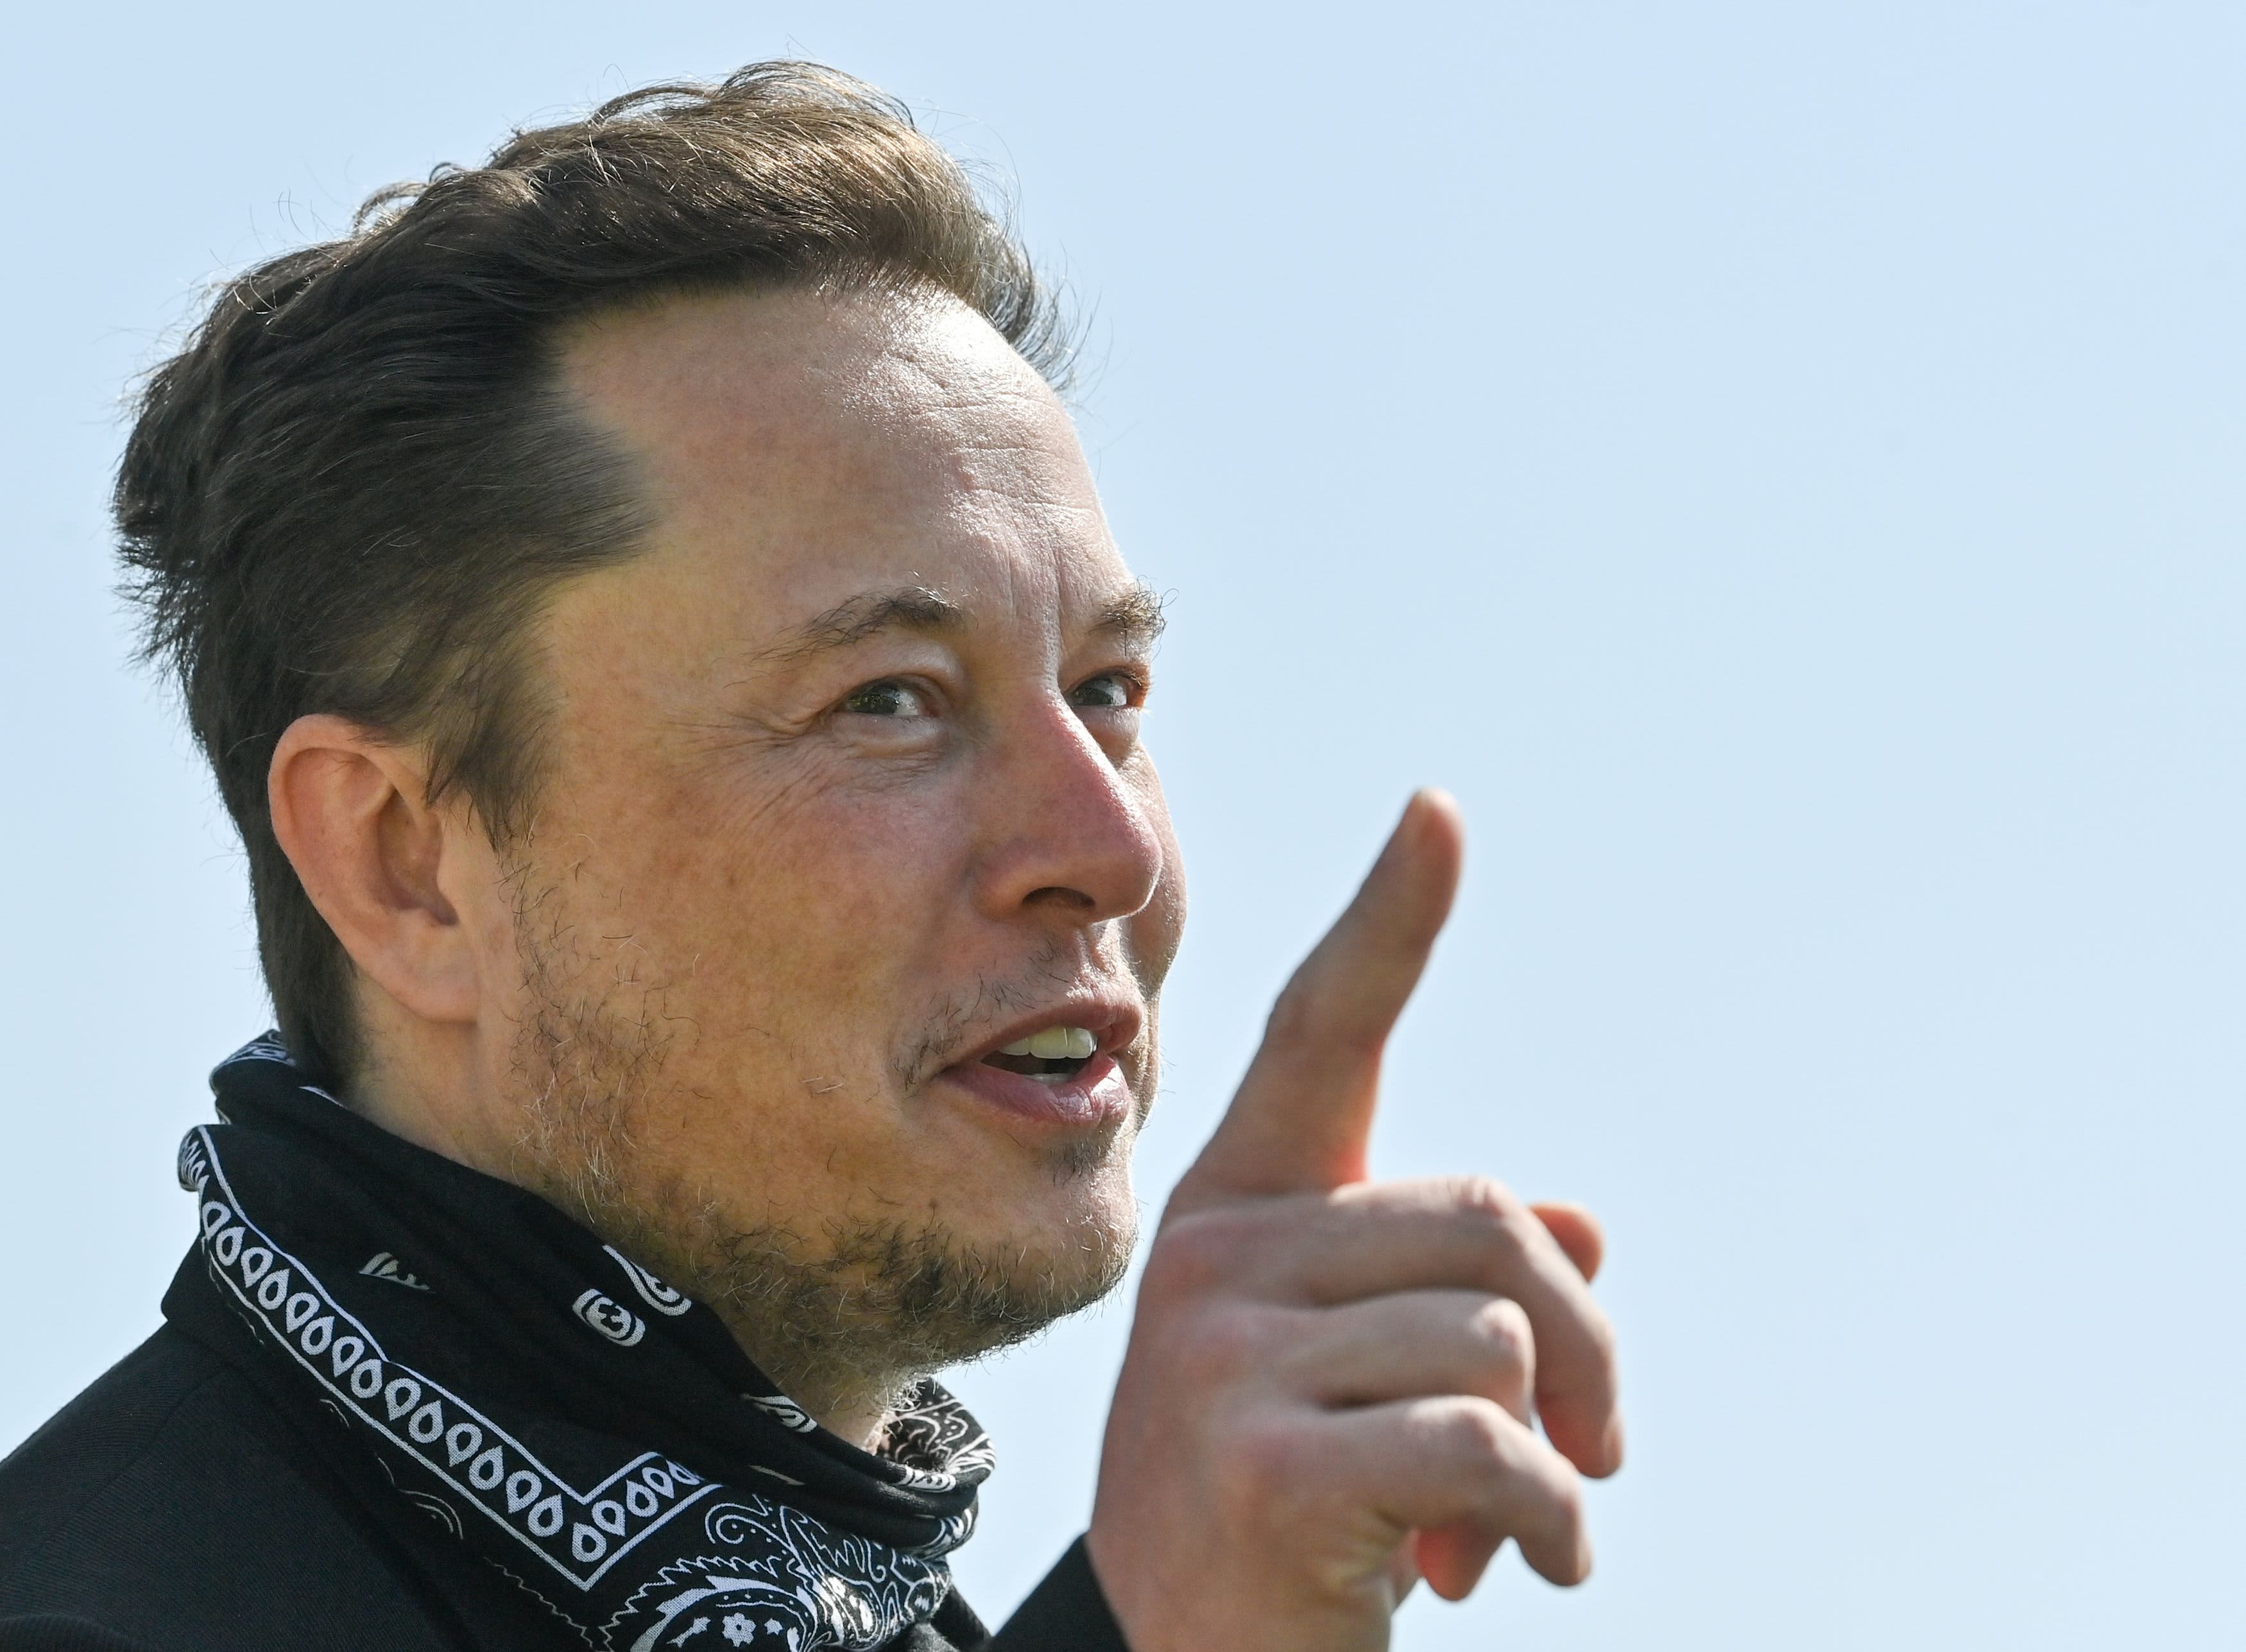 Elon Musk faces $ 15 billion in tax bills, which is probably the real reason he sells shares